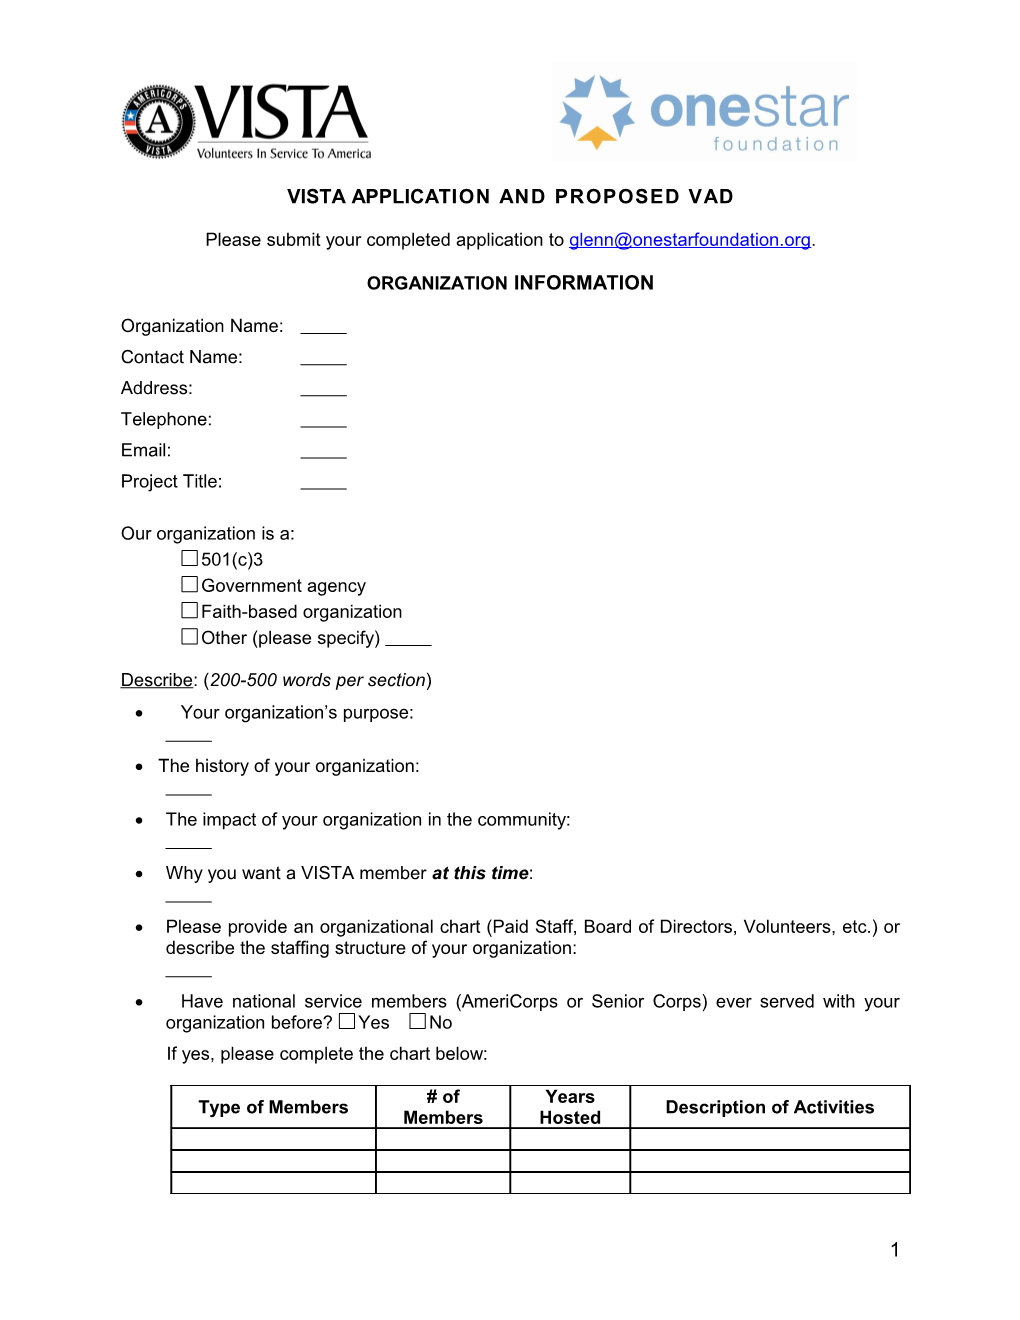 VISTA Application and Proposed VAD